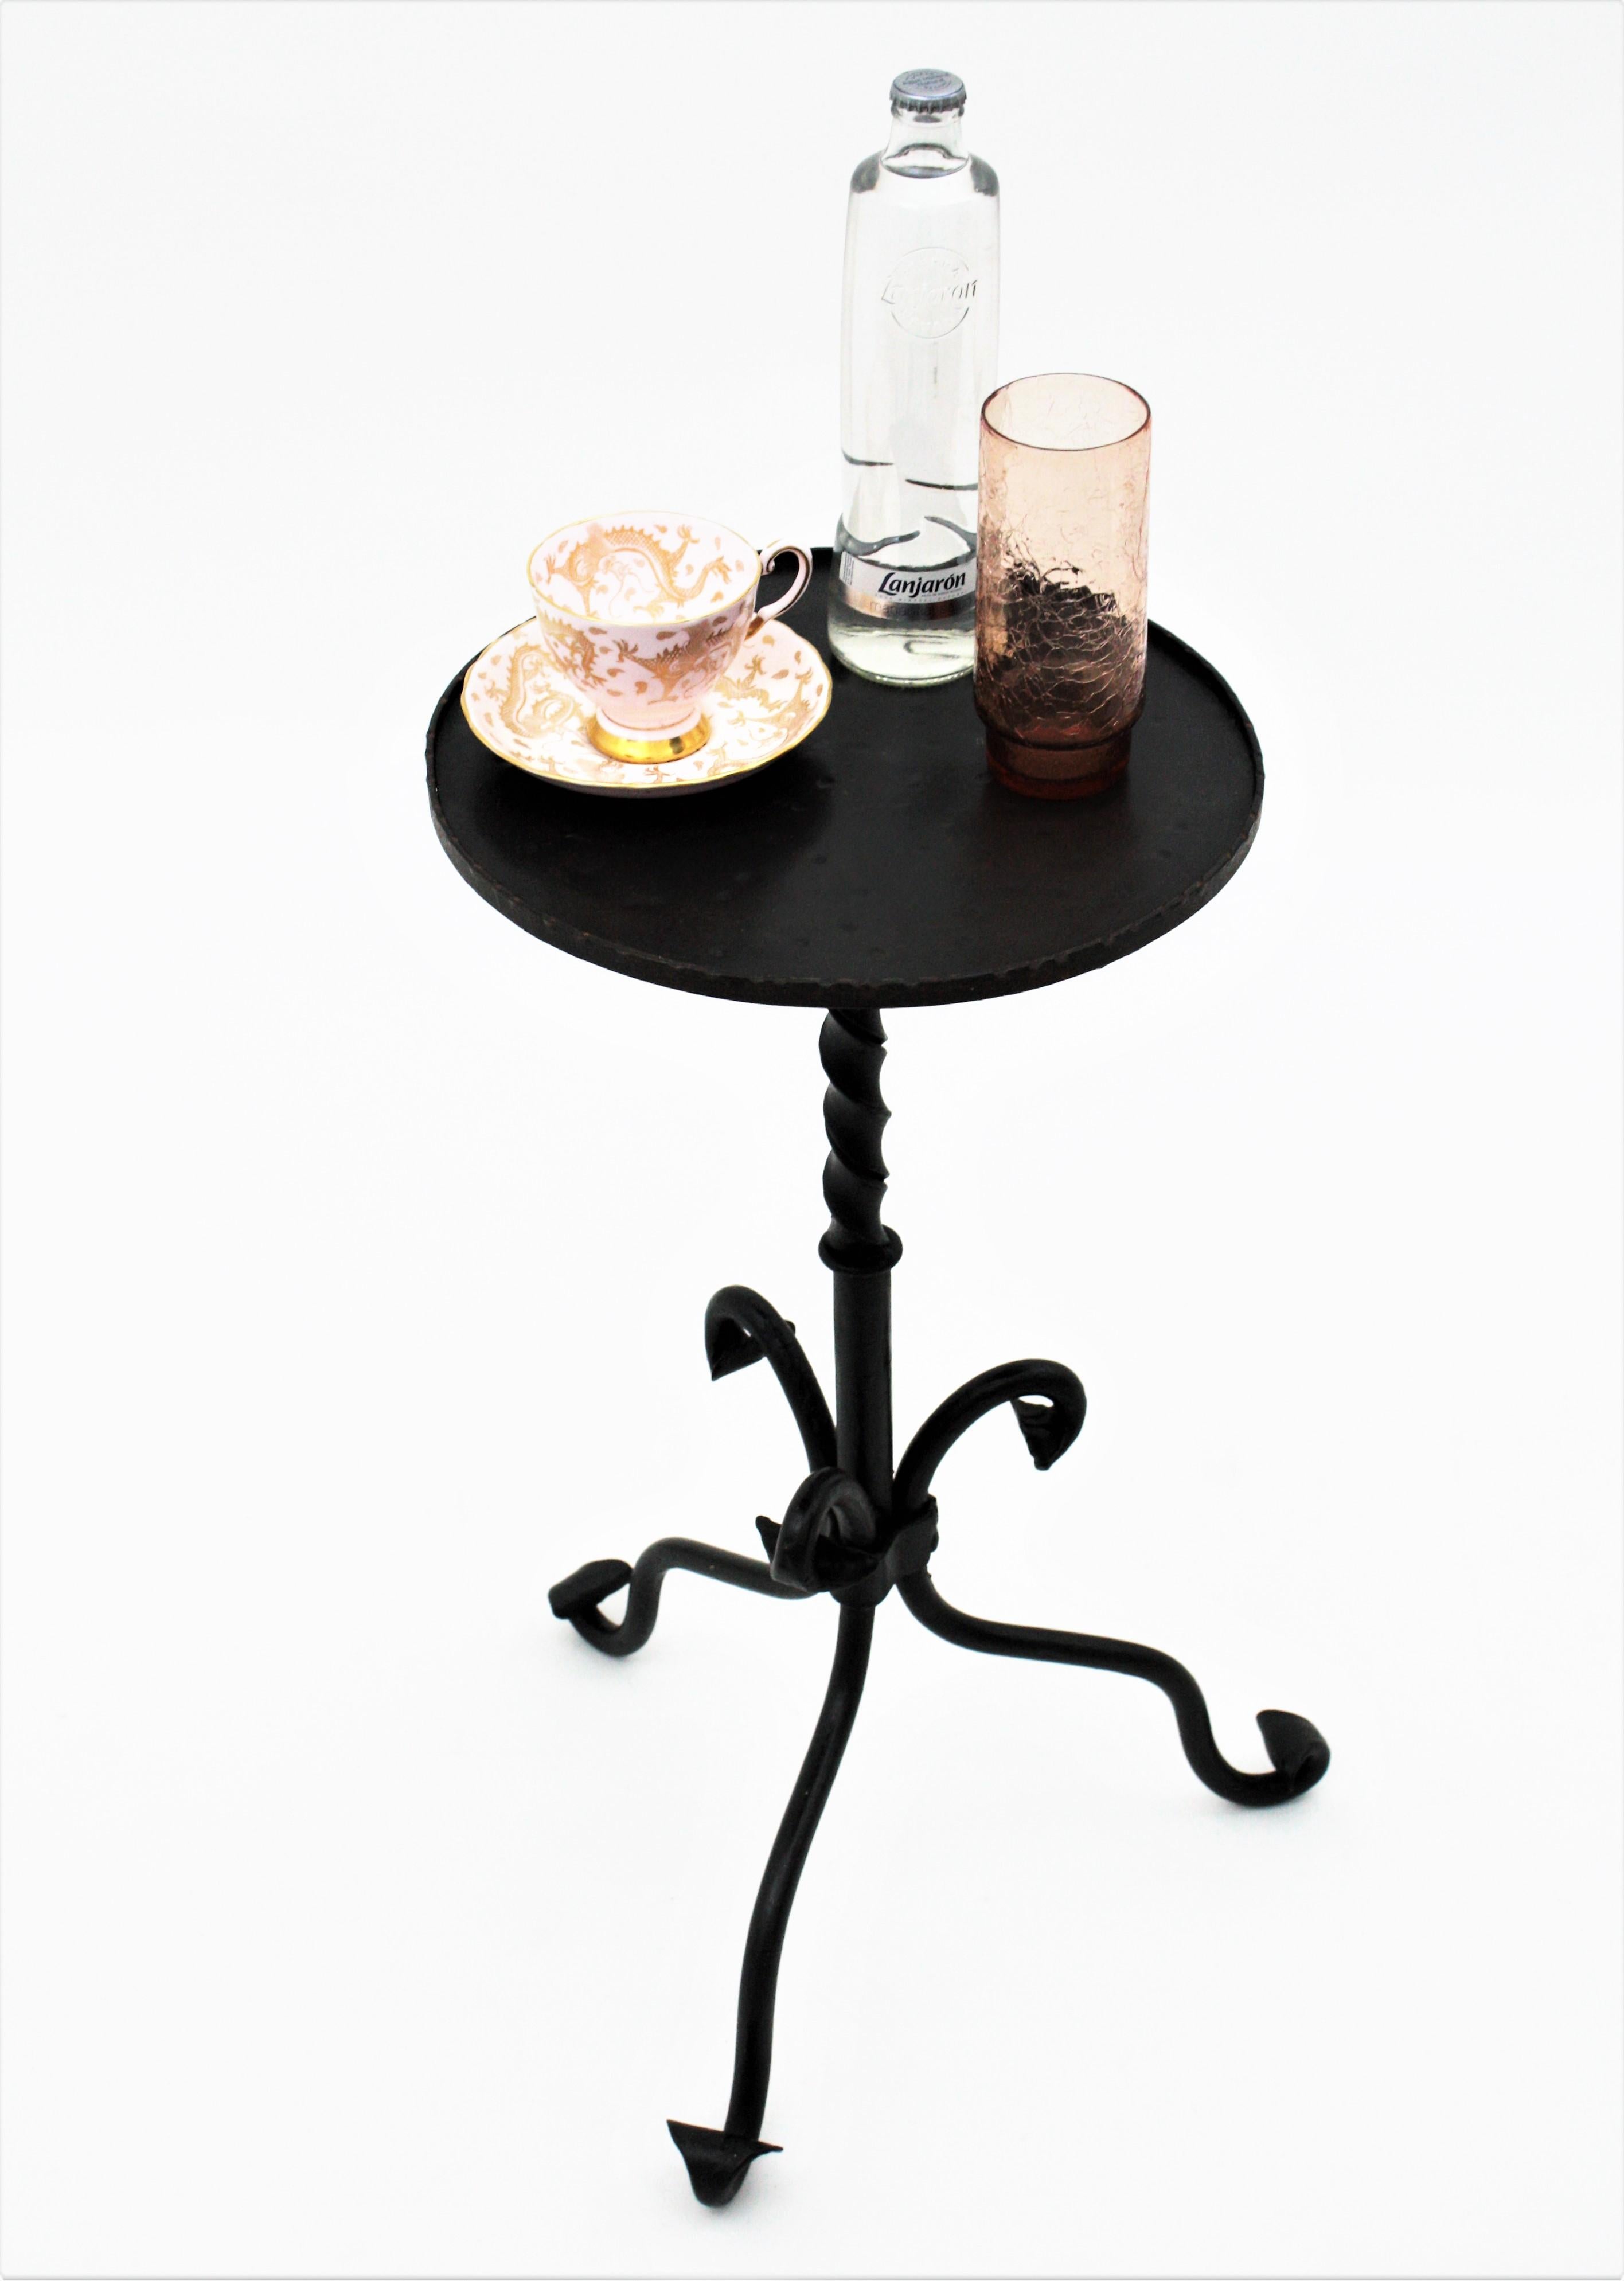 Elegant Gothic style hand-hammered iron round gueridon table standing on a tripod base. Spain, 1940s.
This wrought iron black painted table has twisted details at the steam and the top stands on a tripod base with scroll endings at each leg.
This